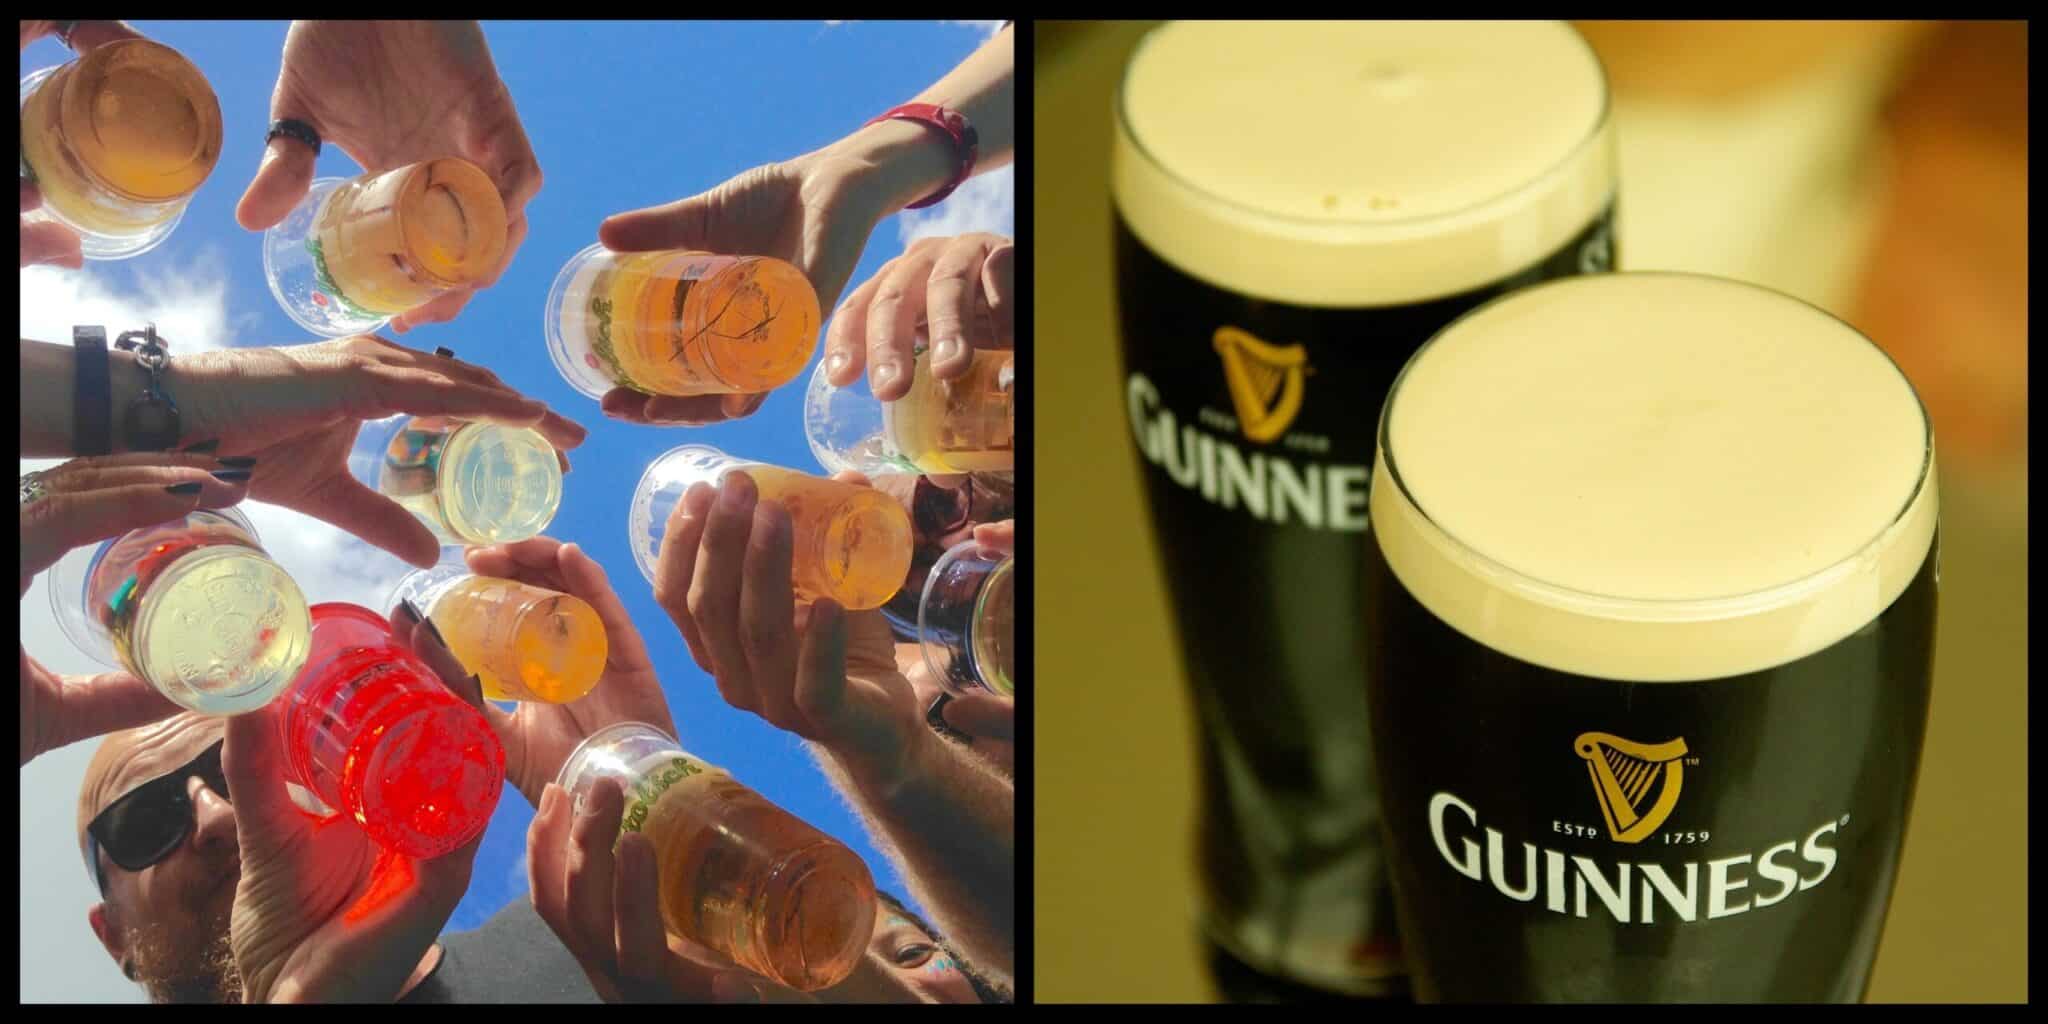 Top 10 FUNNY Irish drinking toasts that will ALWAYS get a laugh